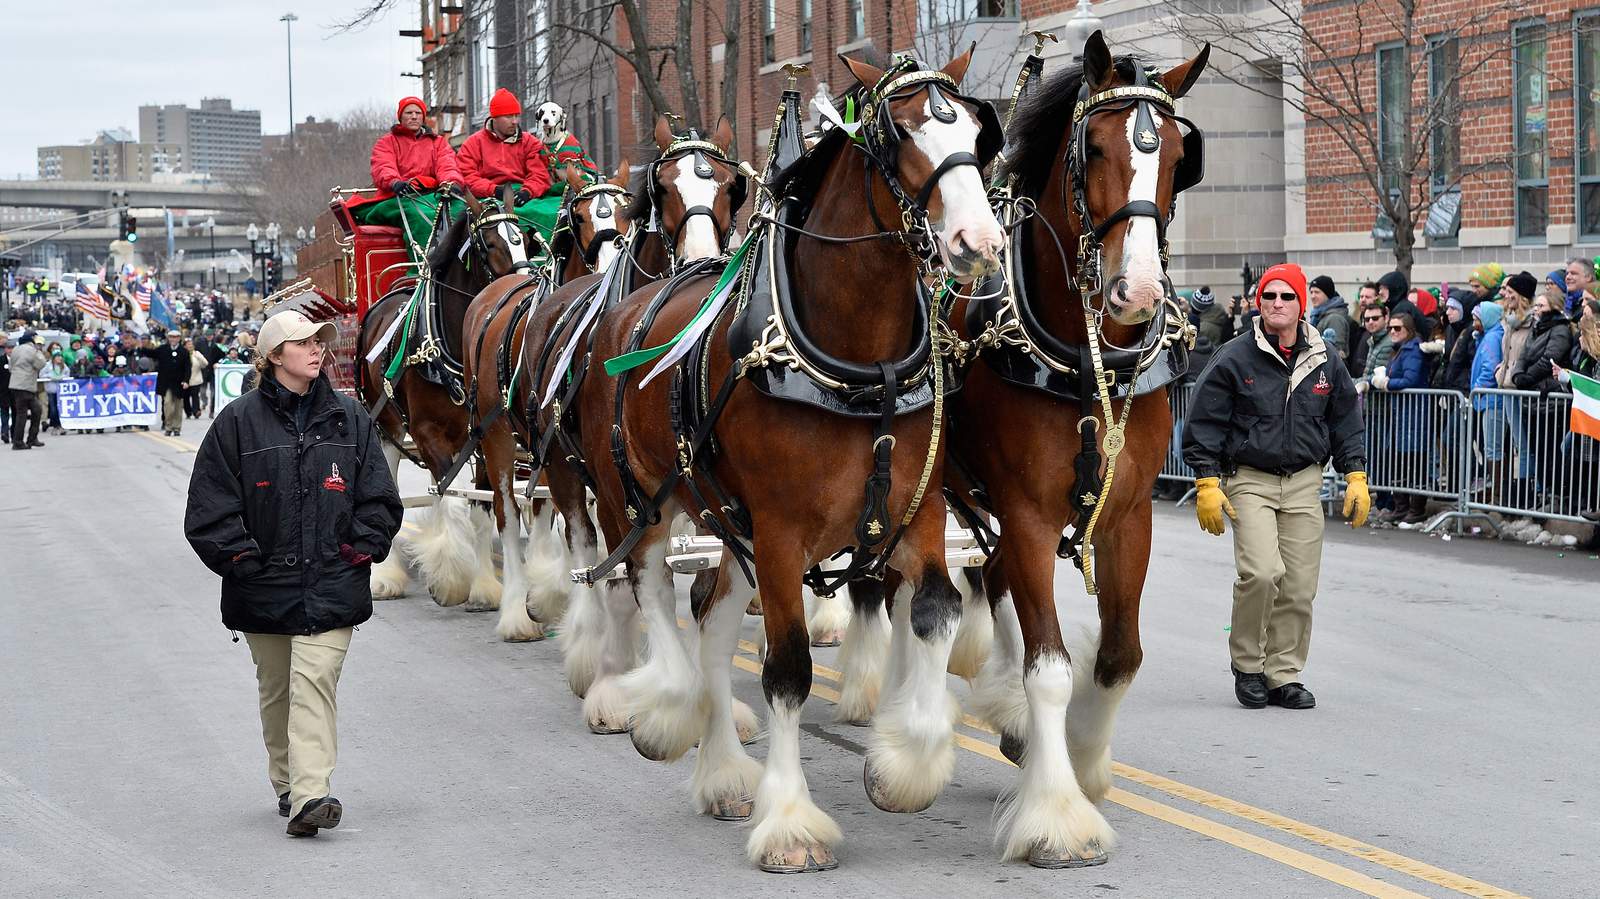 Budweiser Clydesdales to take part in Roanoke’s St. Patrick’s Day parade